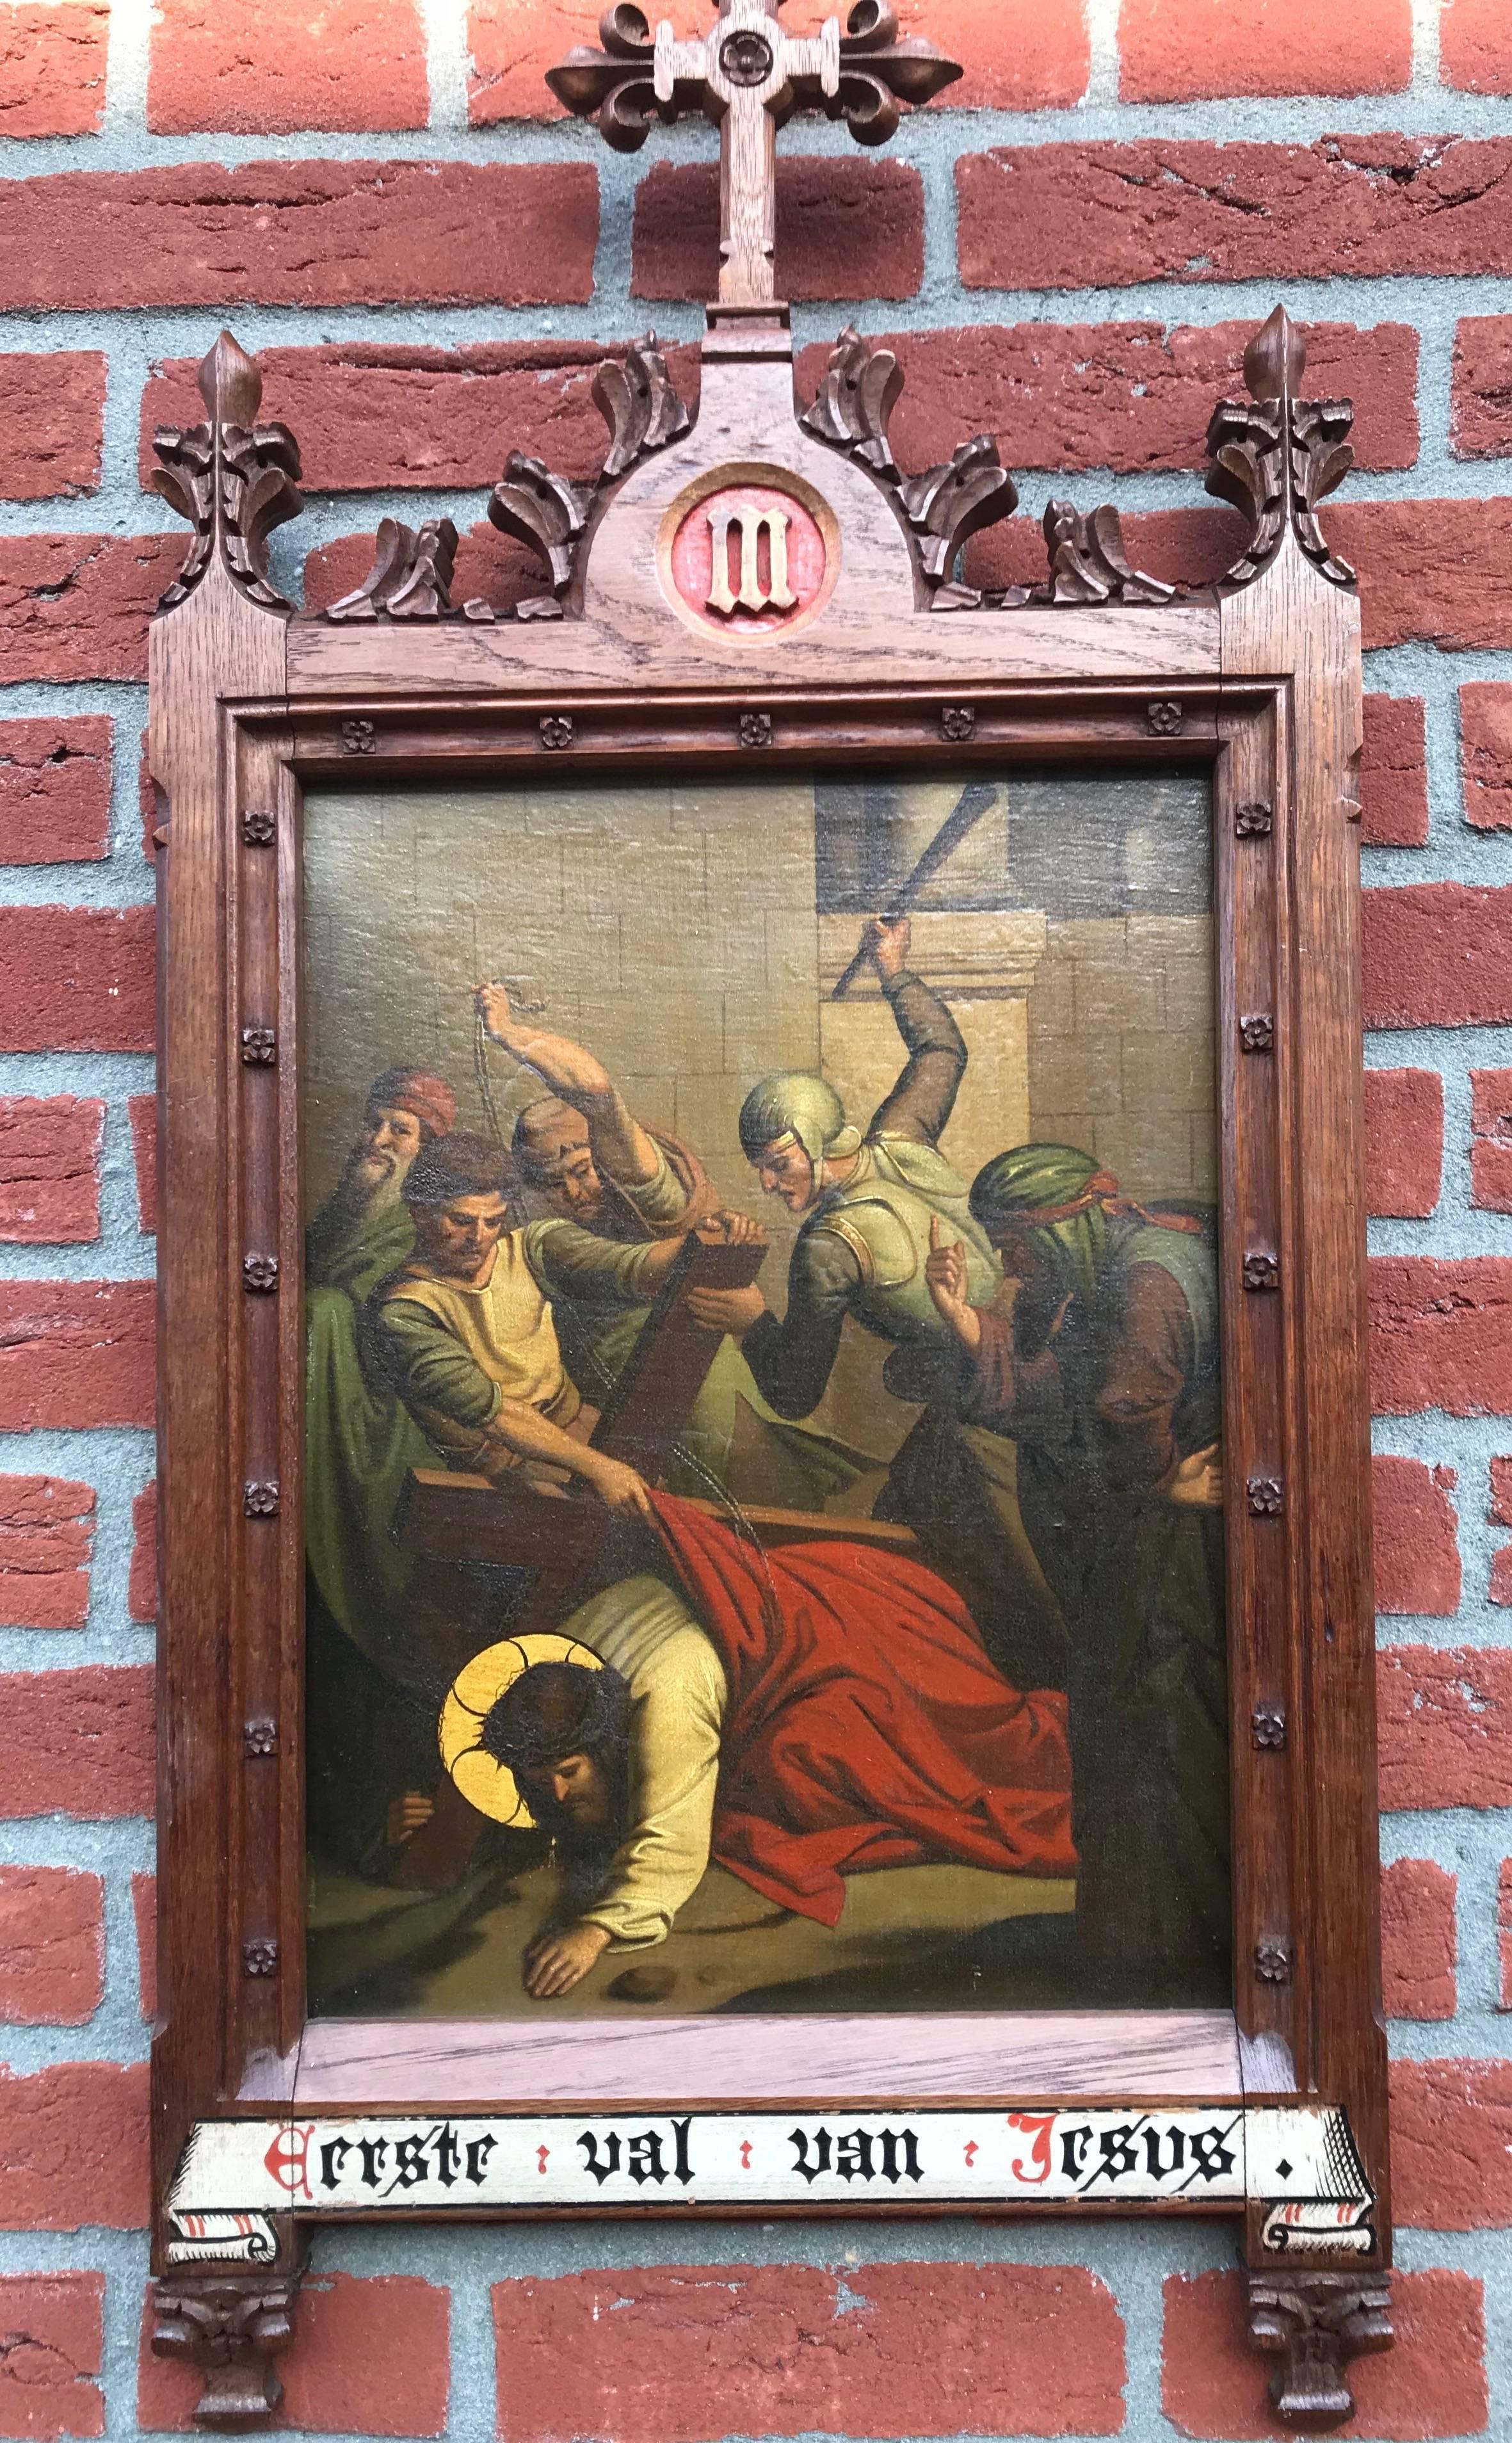 Another stunning religious work of art.

This polychrome painting on metal depicts Jesus as he falls for the first time under the weight of the cross. The vicious soldiers can't wait to give him a beating and make things even more tragic. The